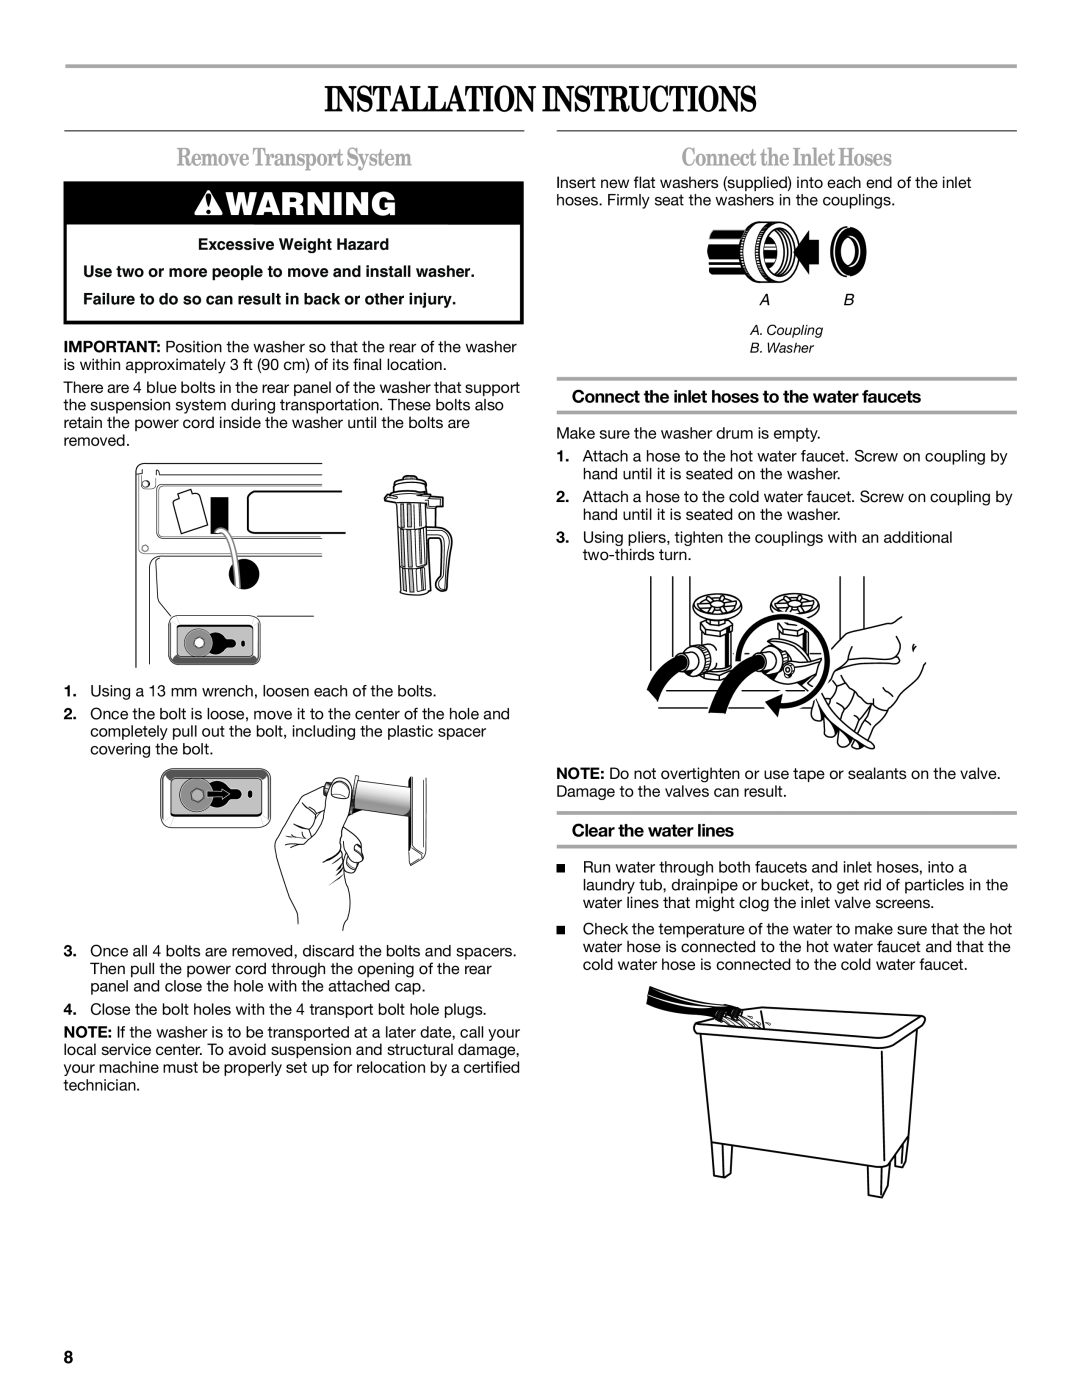 Whirlpool W10063560 manual Installation Instructions, RemoveTransportSystem, ConnecttheInletHoses, Clear the water lines 